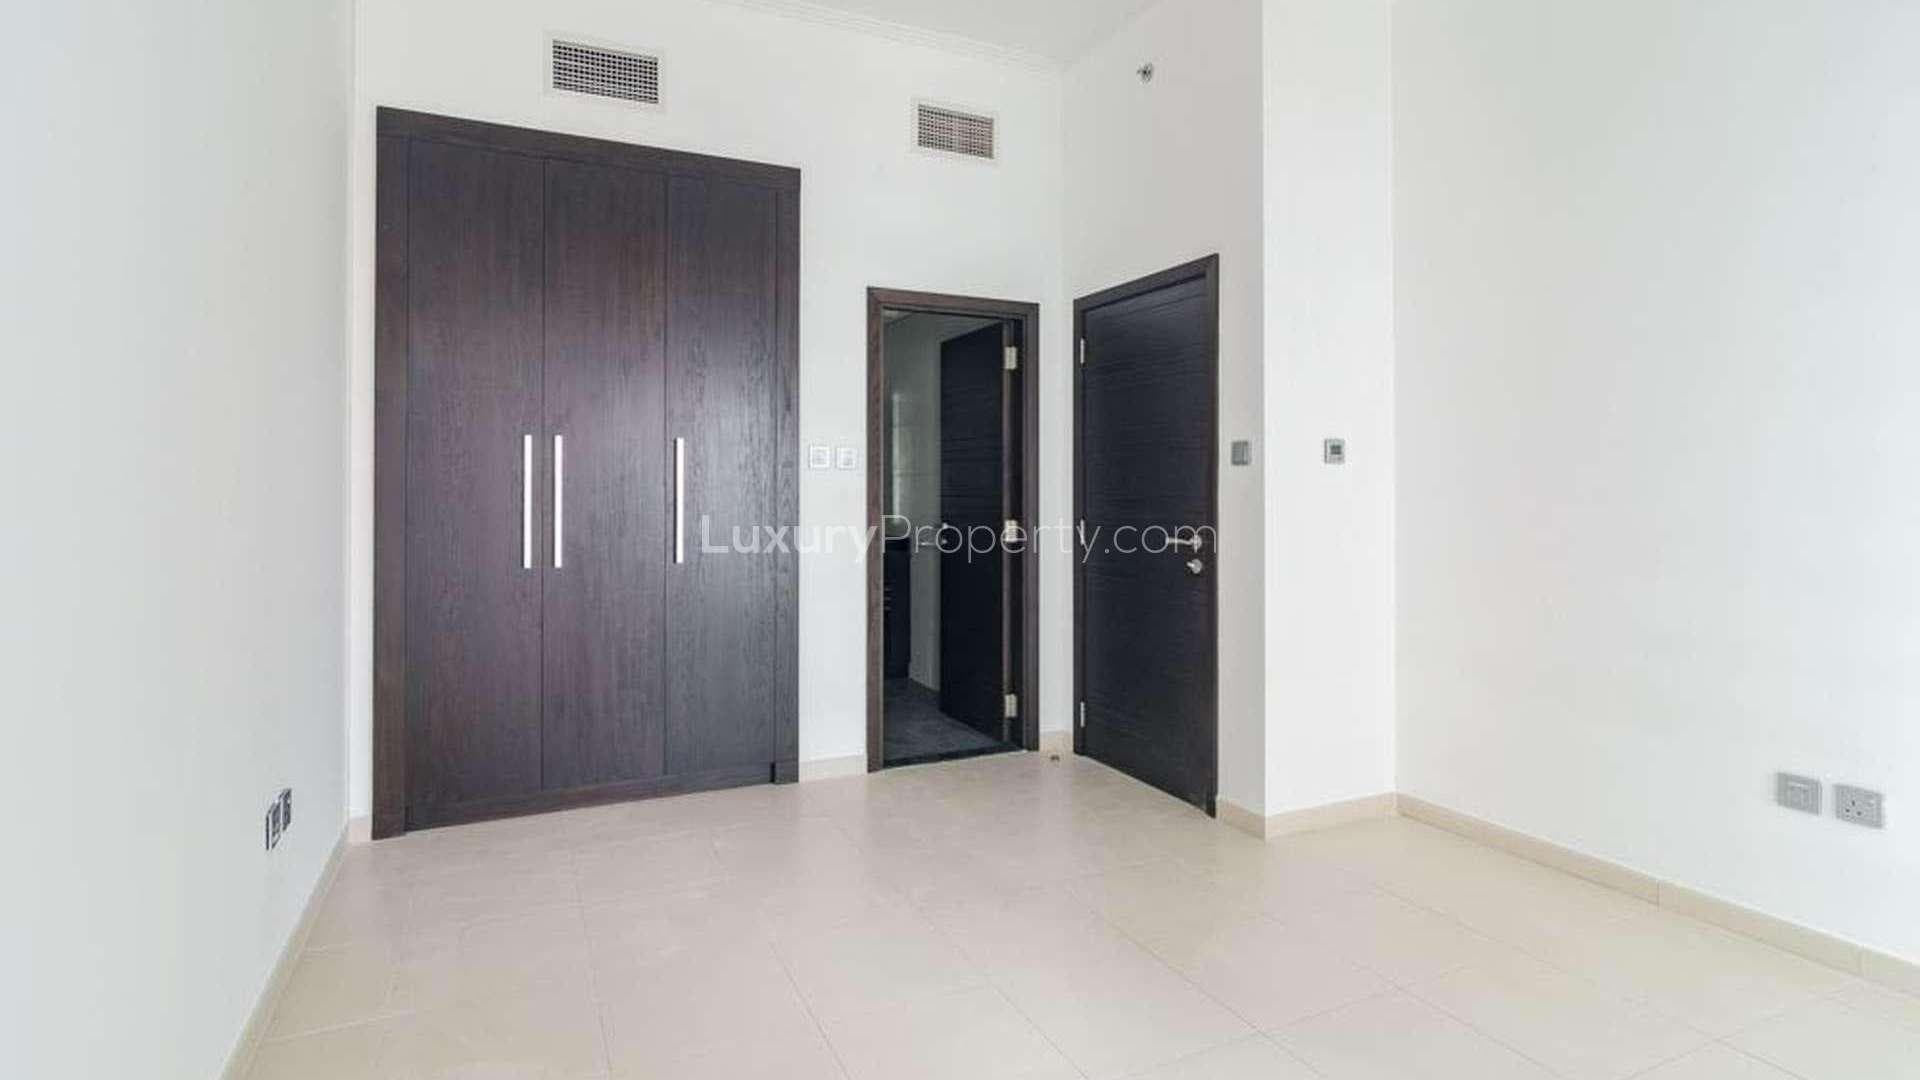 2 Bedroom Apartment For Rent Cayan Tower Lp32719 27c087e7eac80e00.jpg